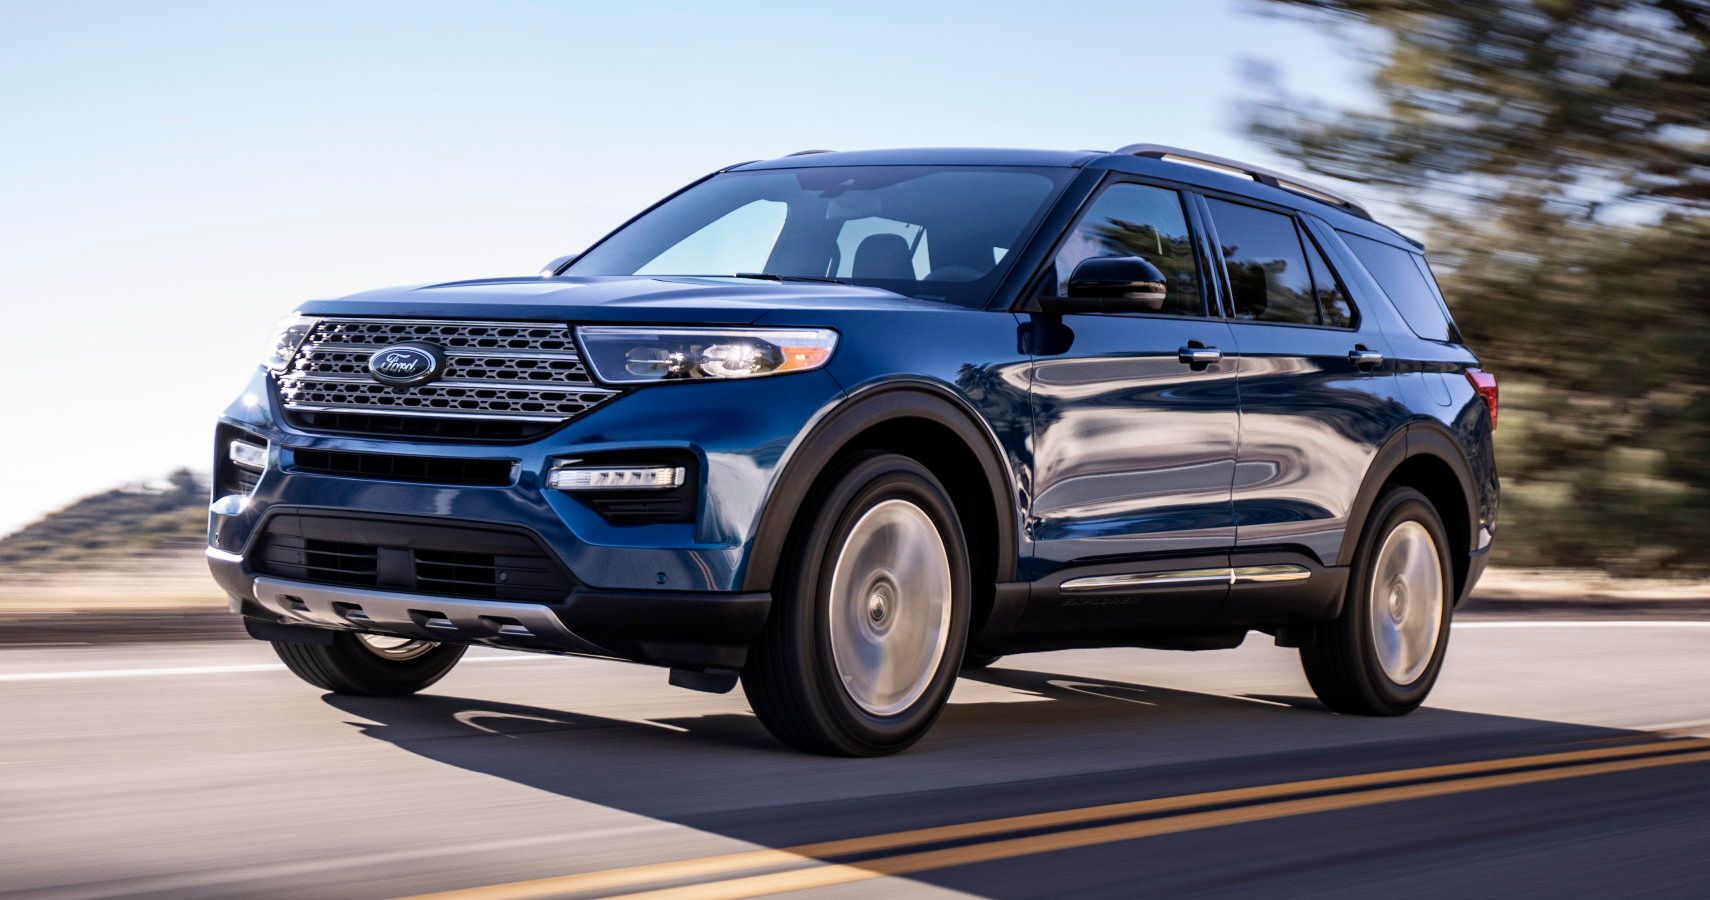 Ford introduces its all-new 2020 Explorer ??? a complete redesign of America???s all-time best-selling SUV ??? that now features the broadest model lineup ever, more power and space, and smart new technologies to help tackle life???s adventures.